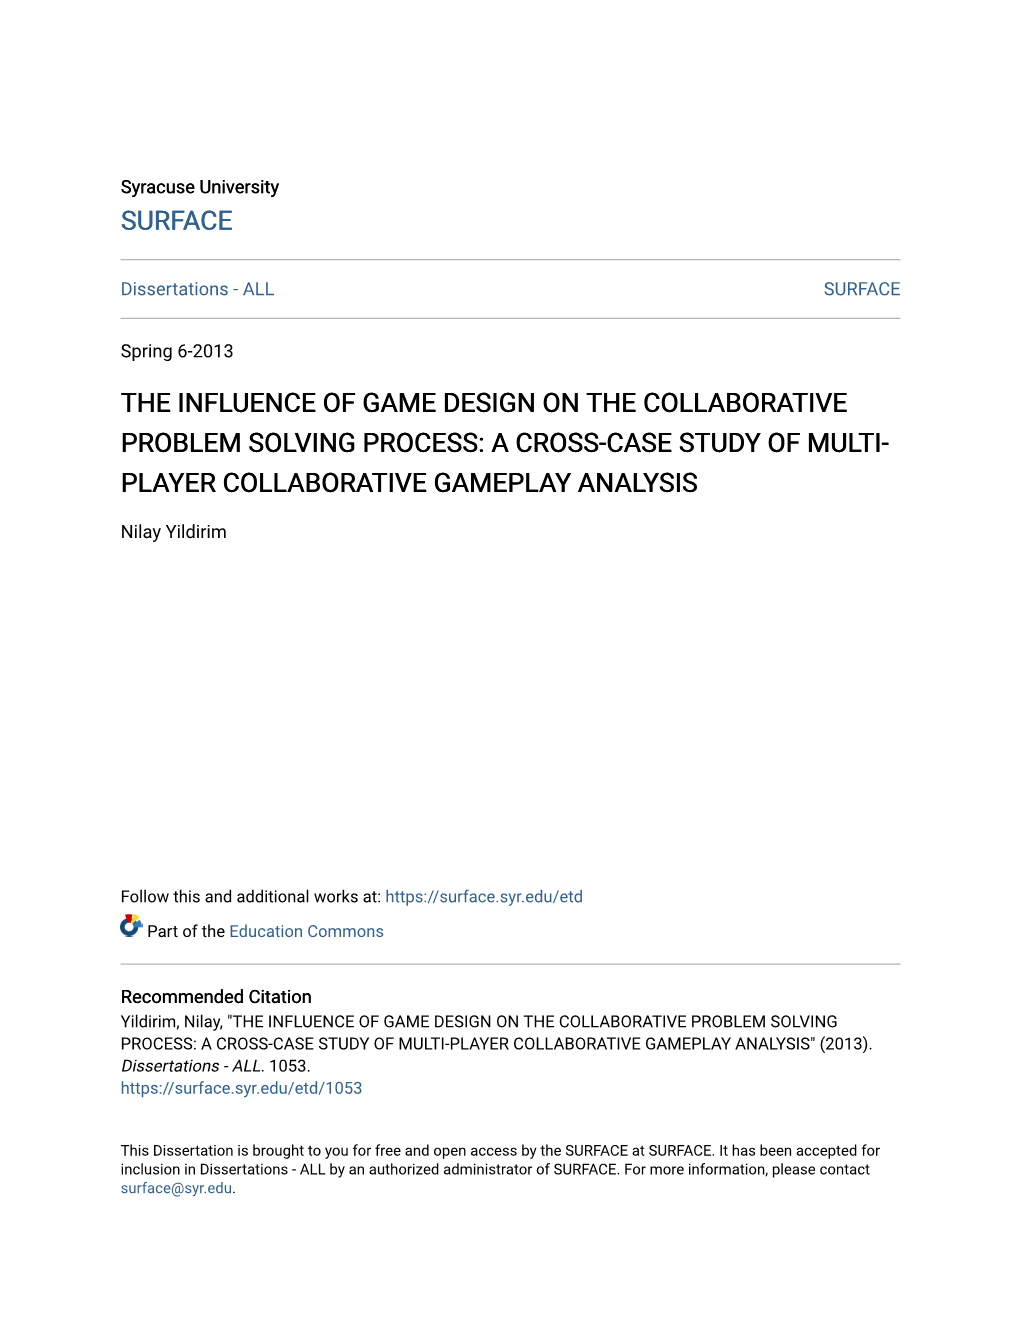 The Influence of Game Design on the Collaborative Problem Solving Process: a Cross-Case Study of Multi- Player Collaborative Gameplay Analysis